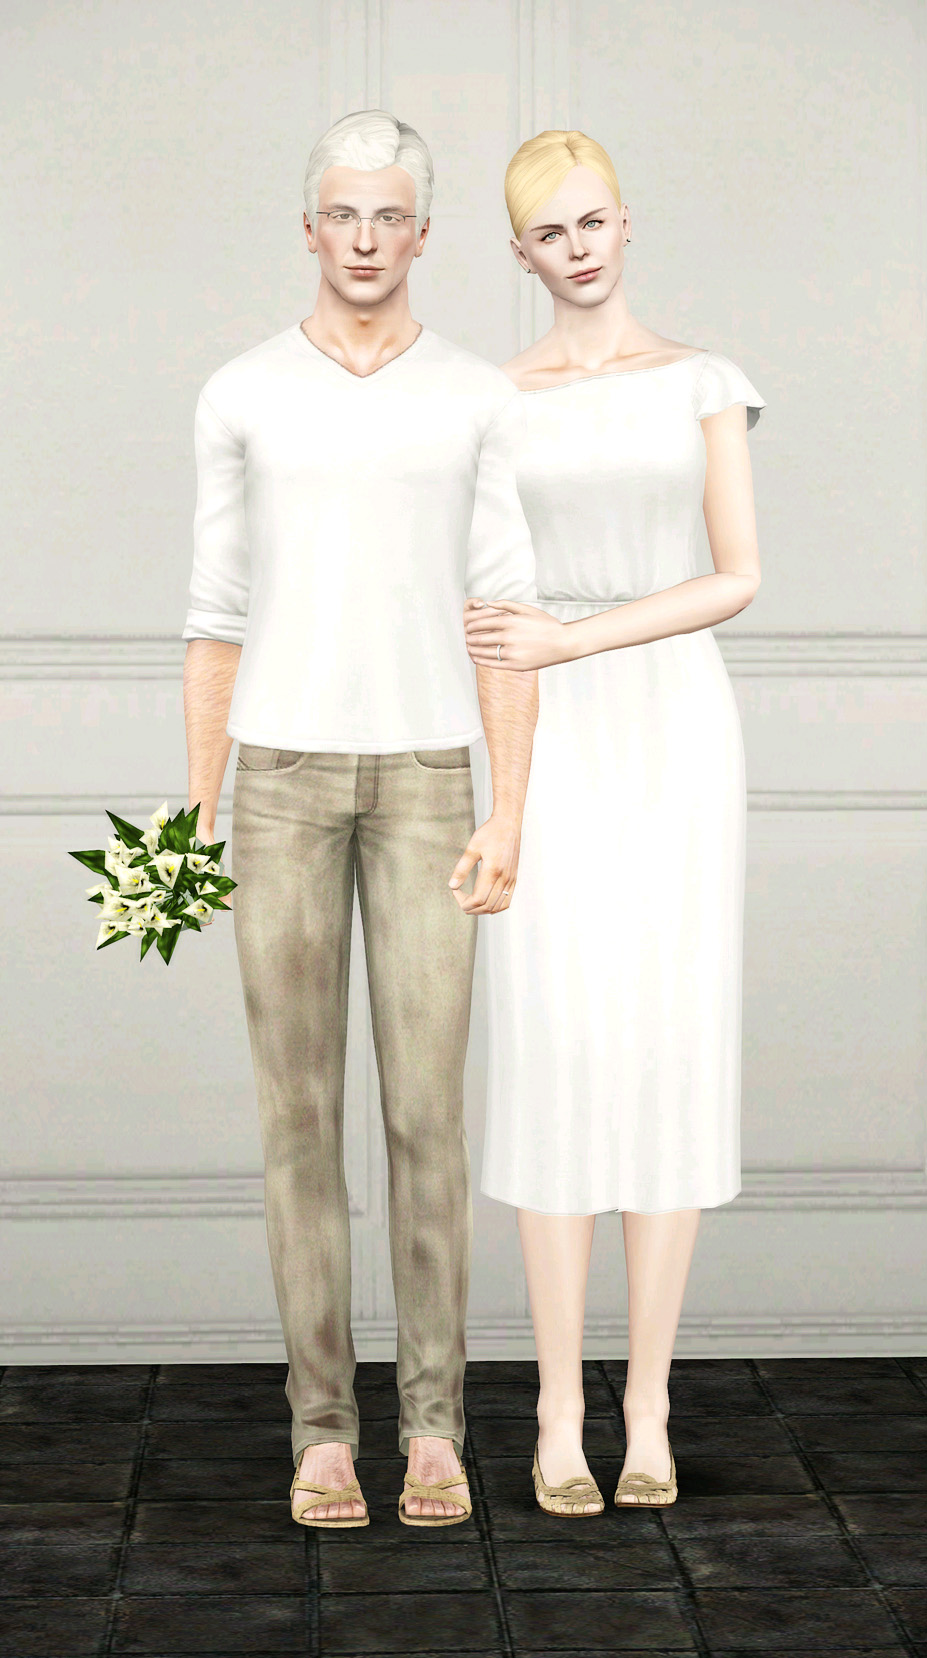 Lovers Sims3pose